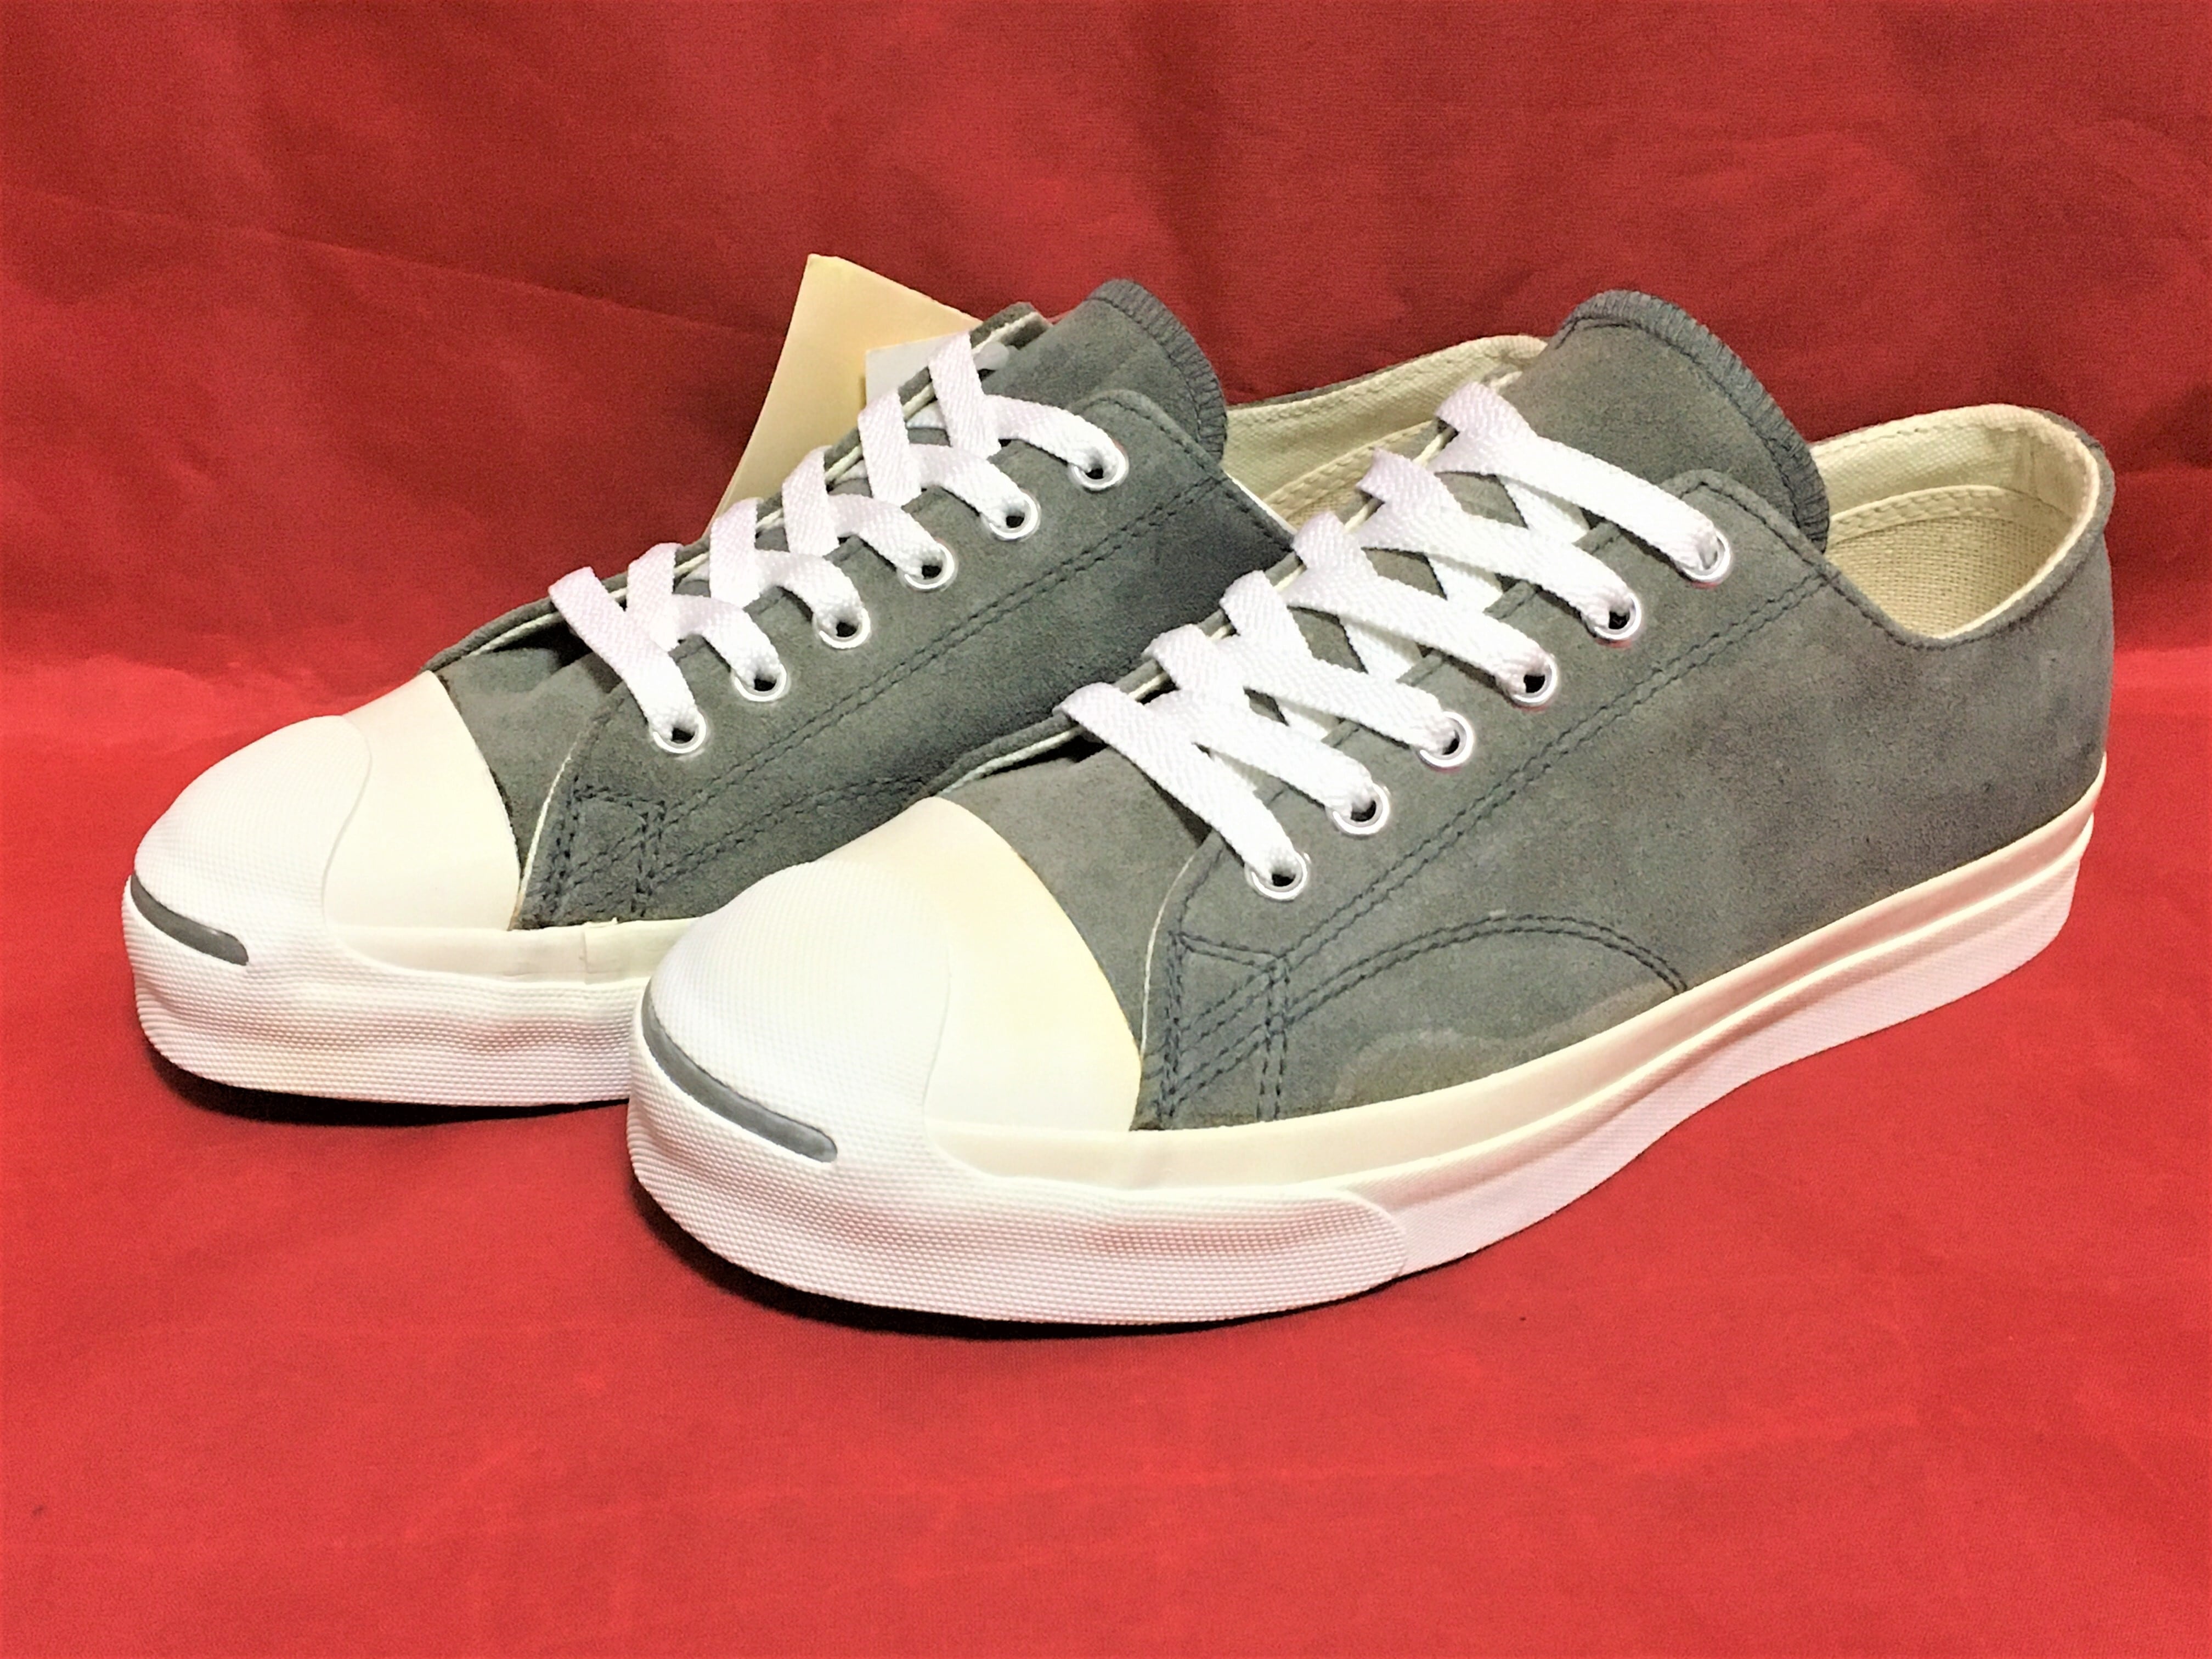 Converse Jack Purcell Suede ジャクパーセル スエード-